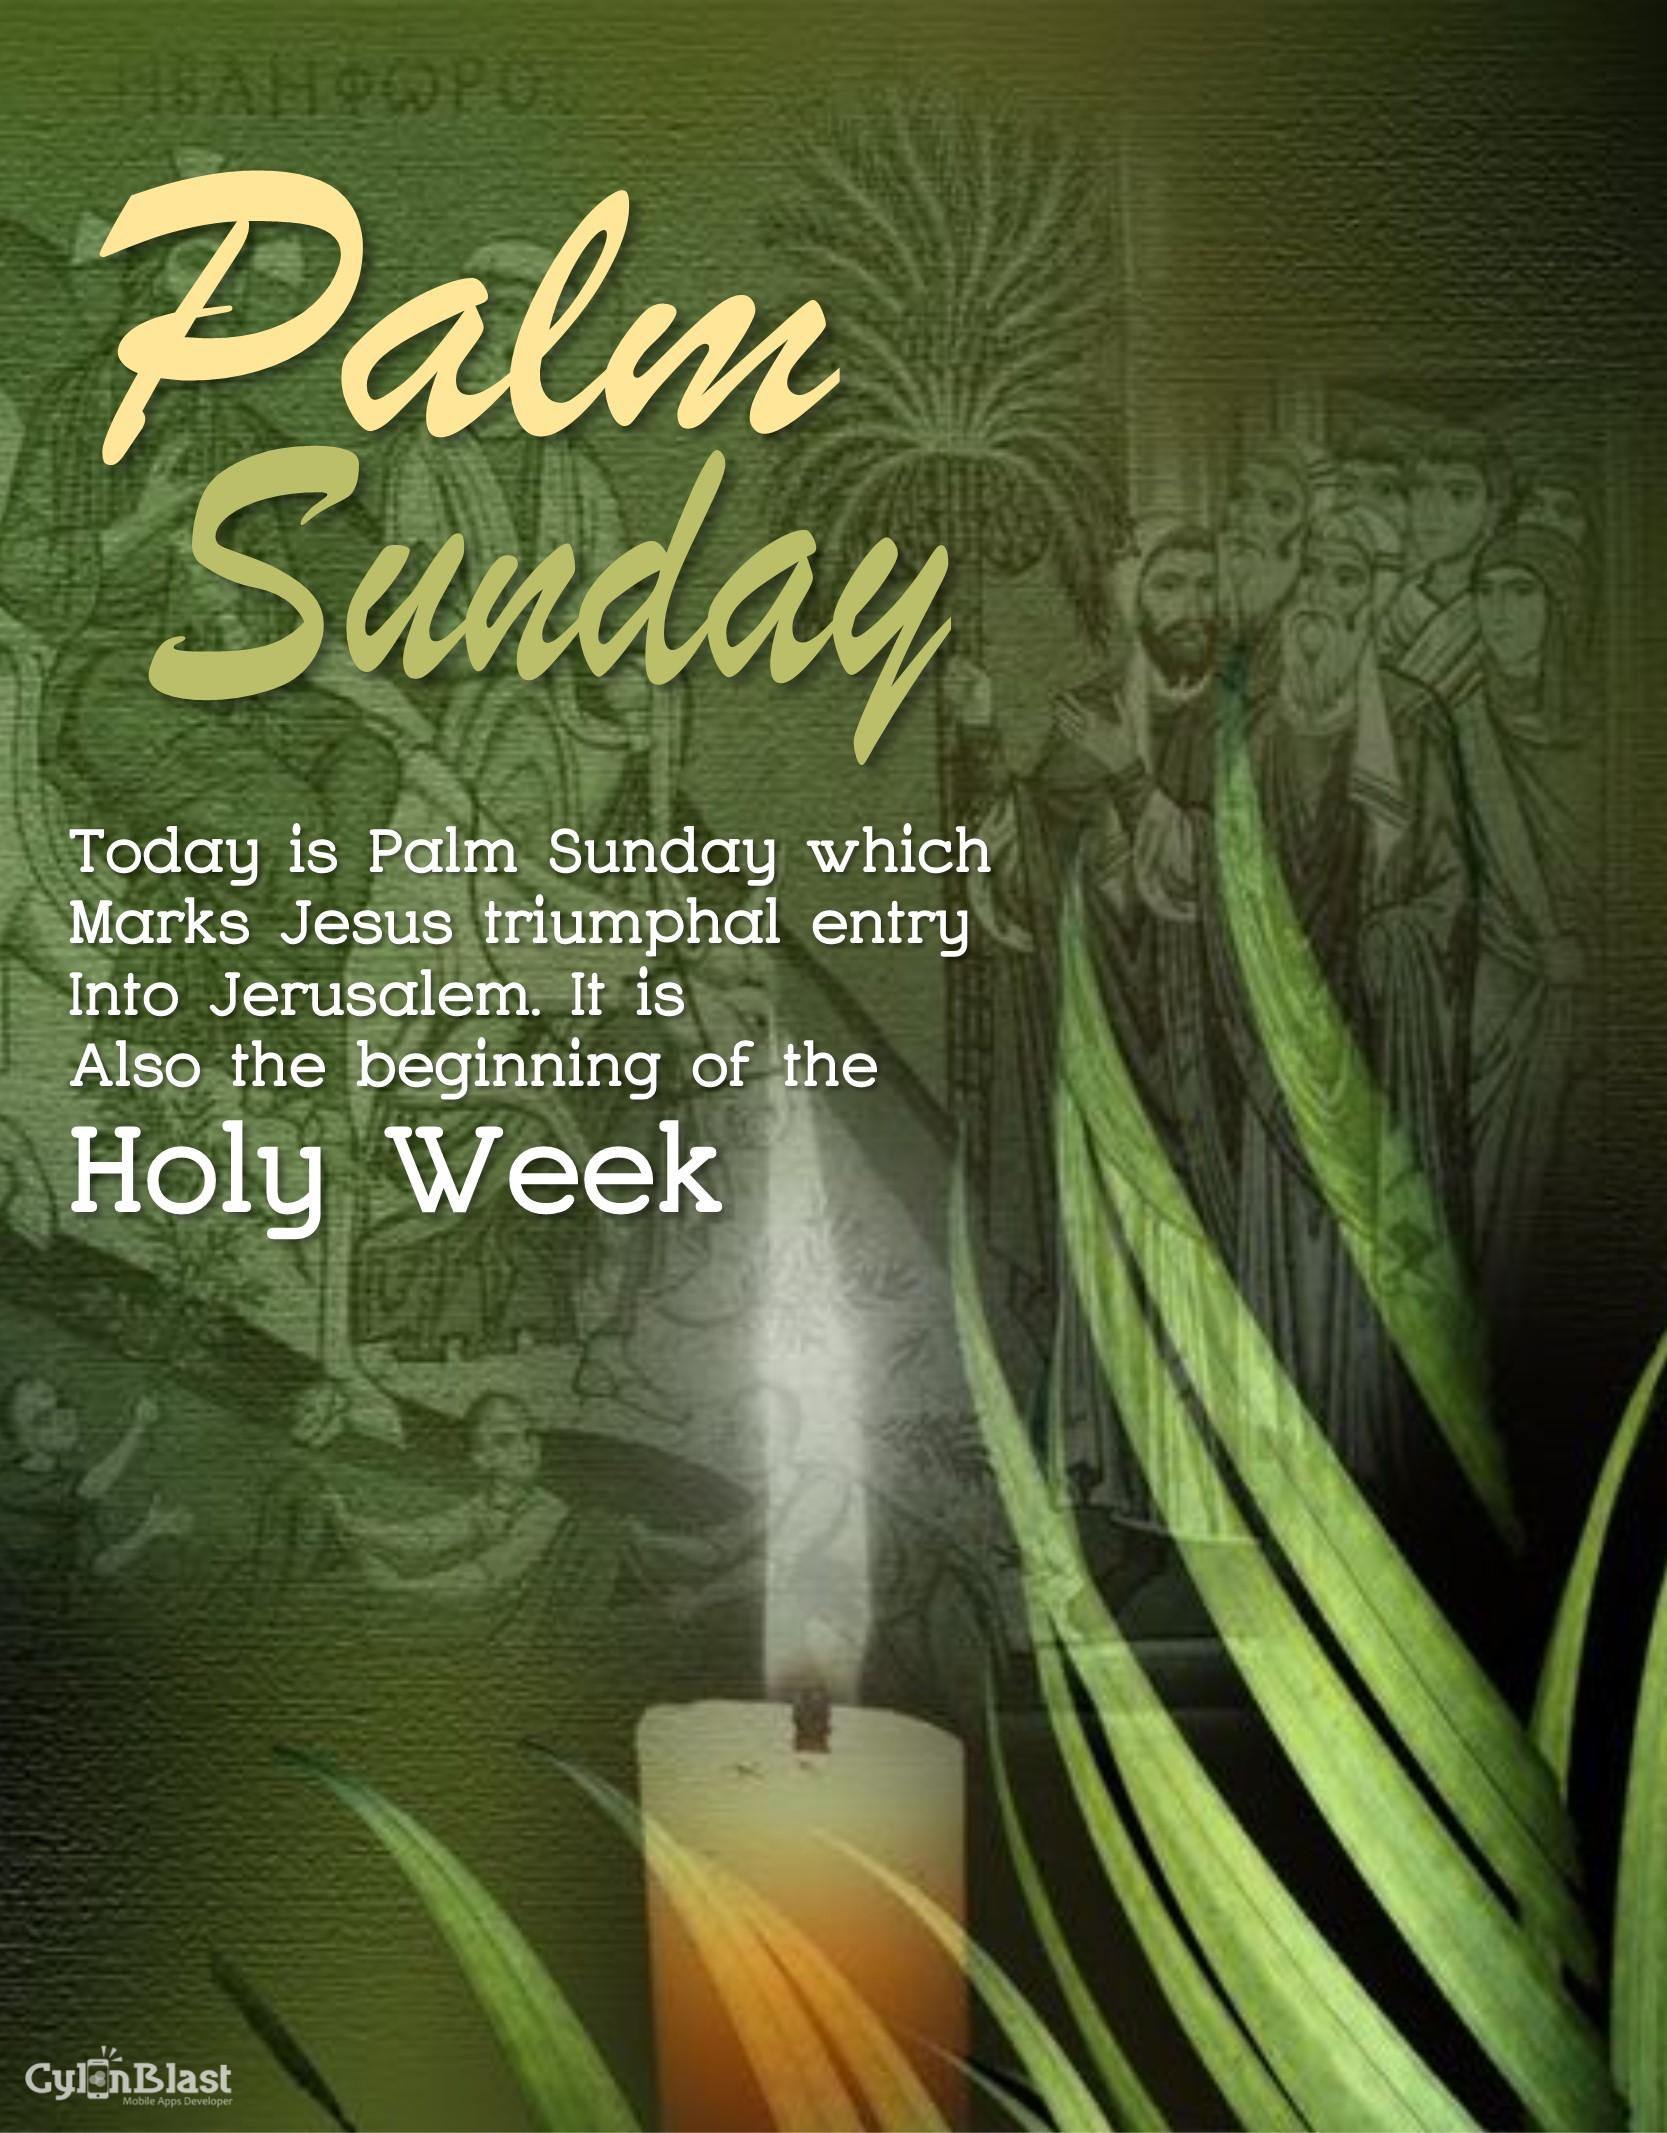 Palm Sunday Quotes & Wishes 2021 for Android - APK Download